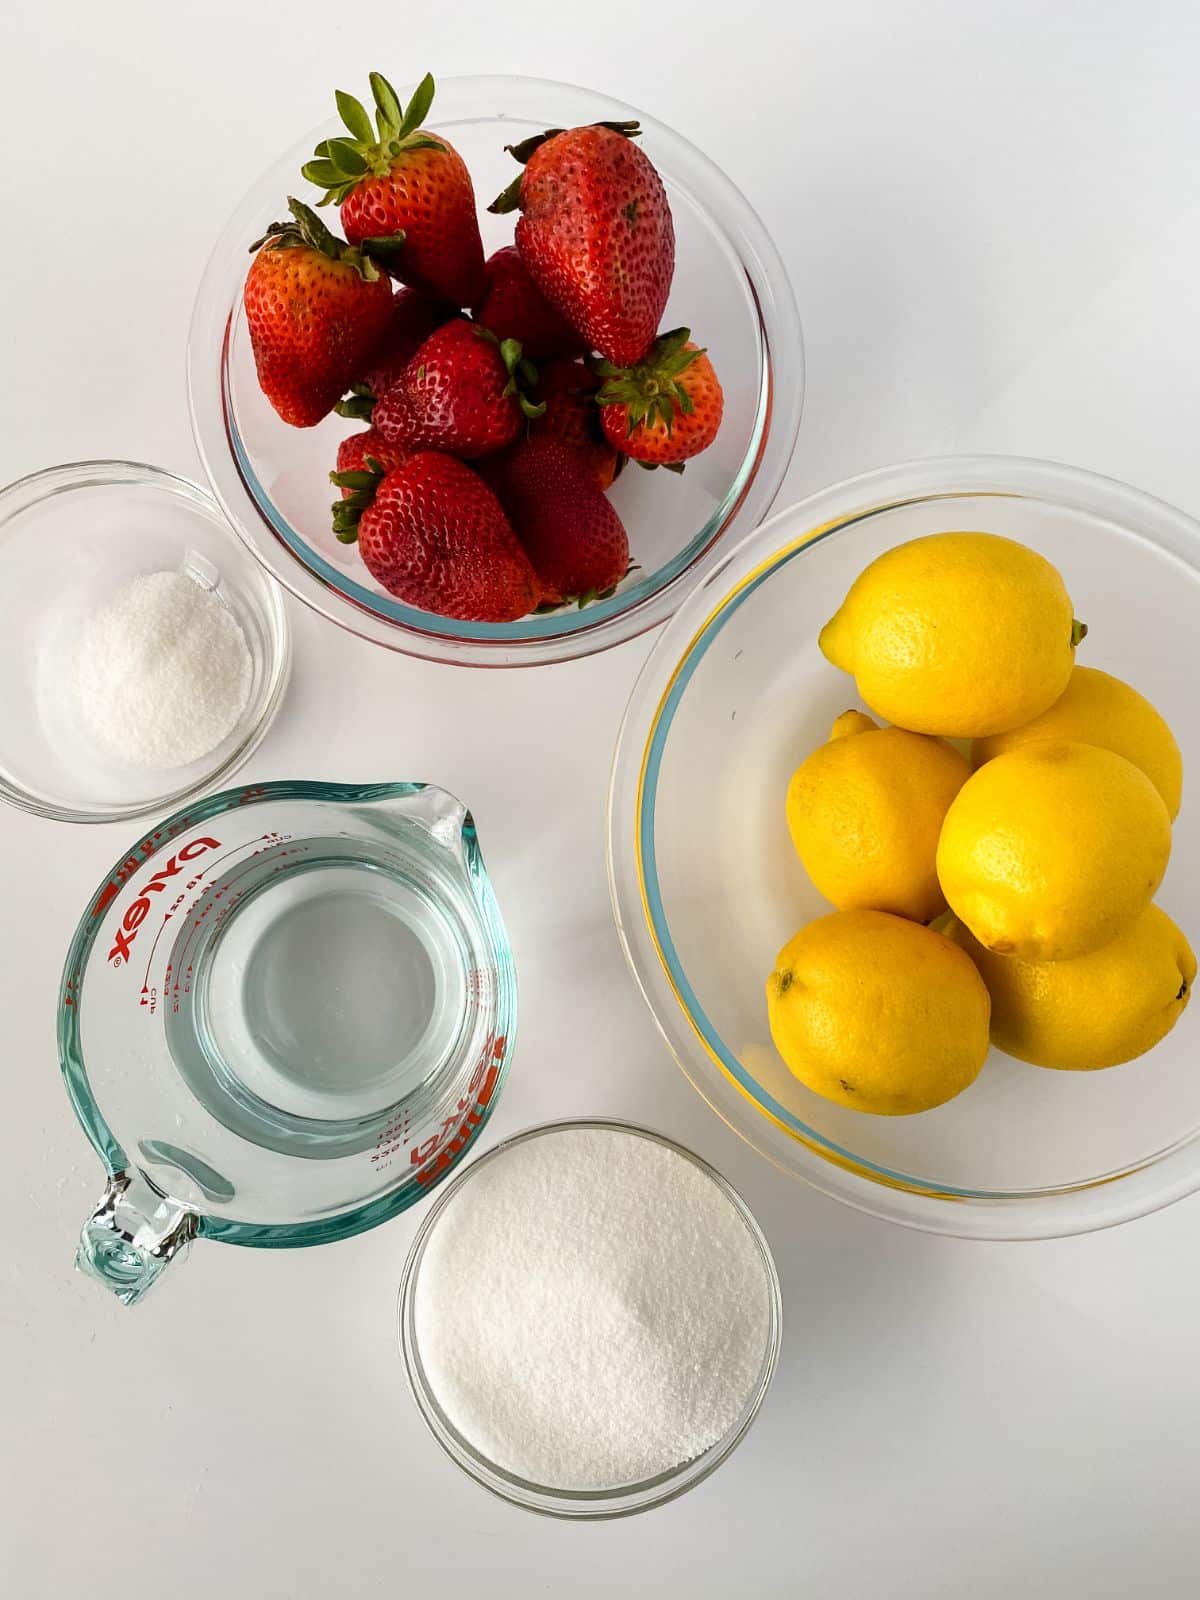 glass bowls holding lemons and strawberries on white table